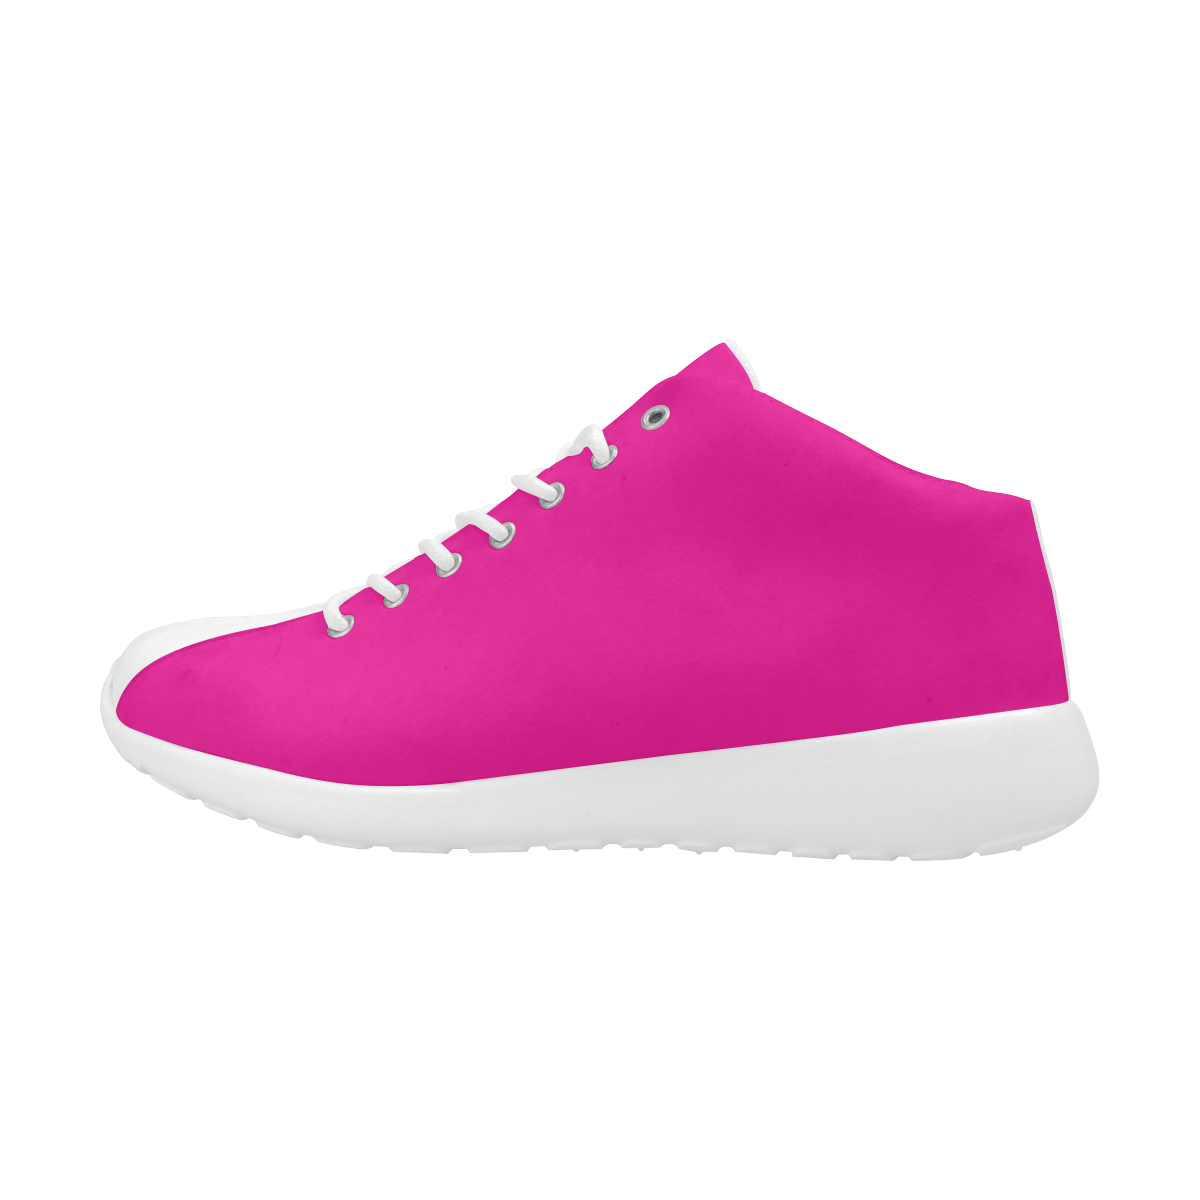 Hot Fuchsia Pink Solid Colored Men's Basketball Training Shoes (Model 47502)